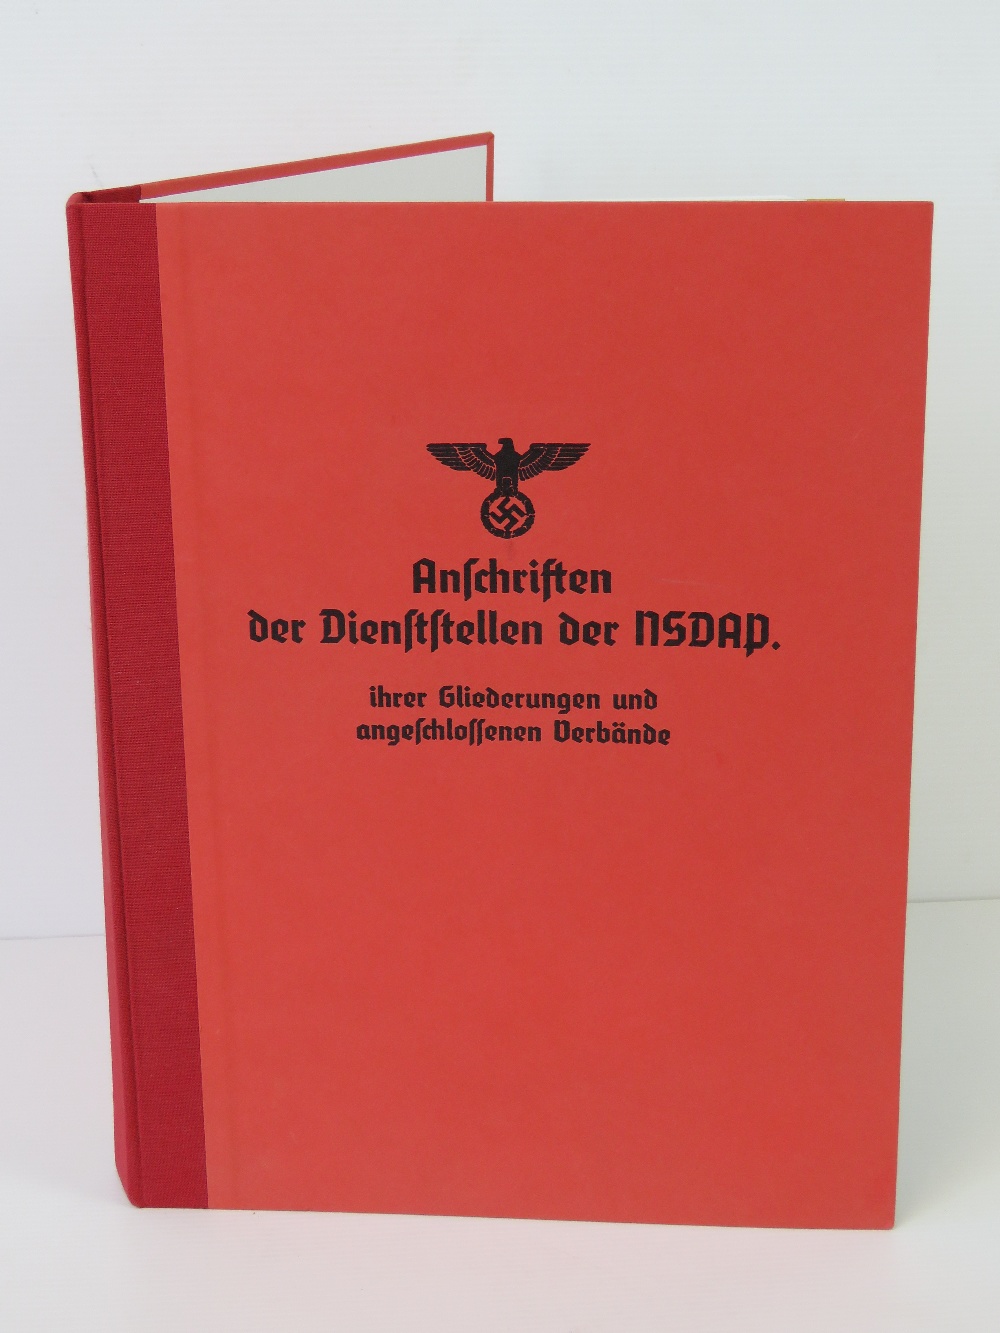 A reproduction NSDAP party organisation